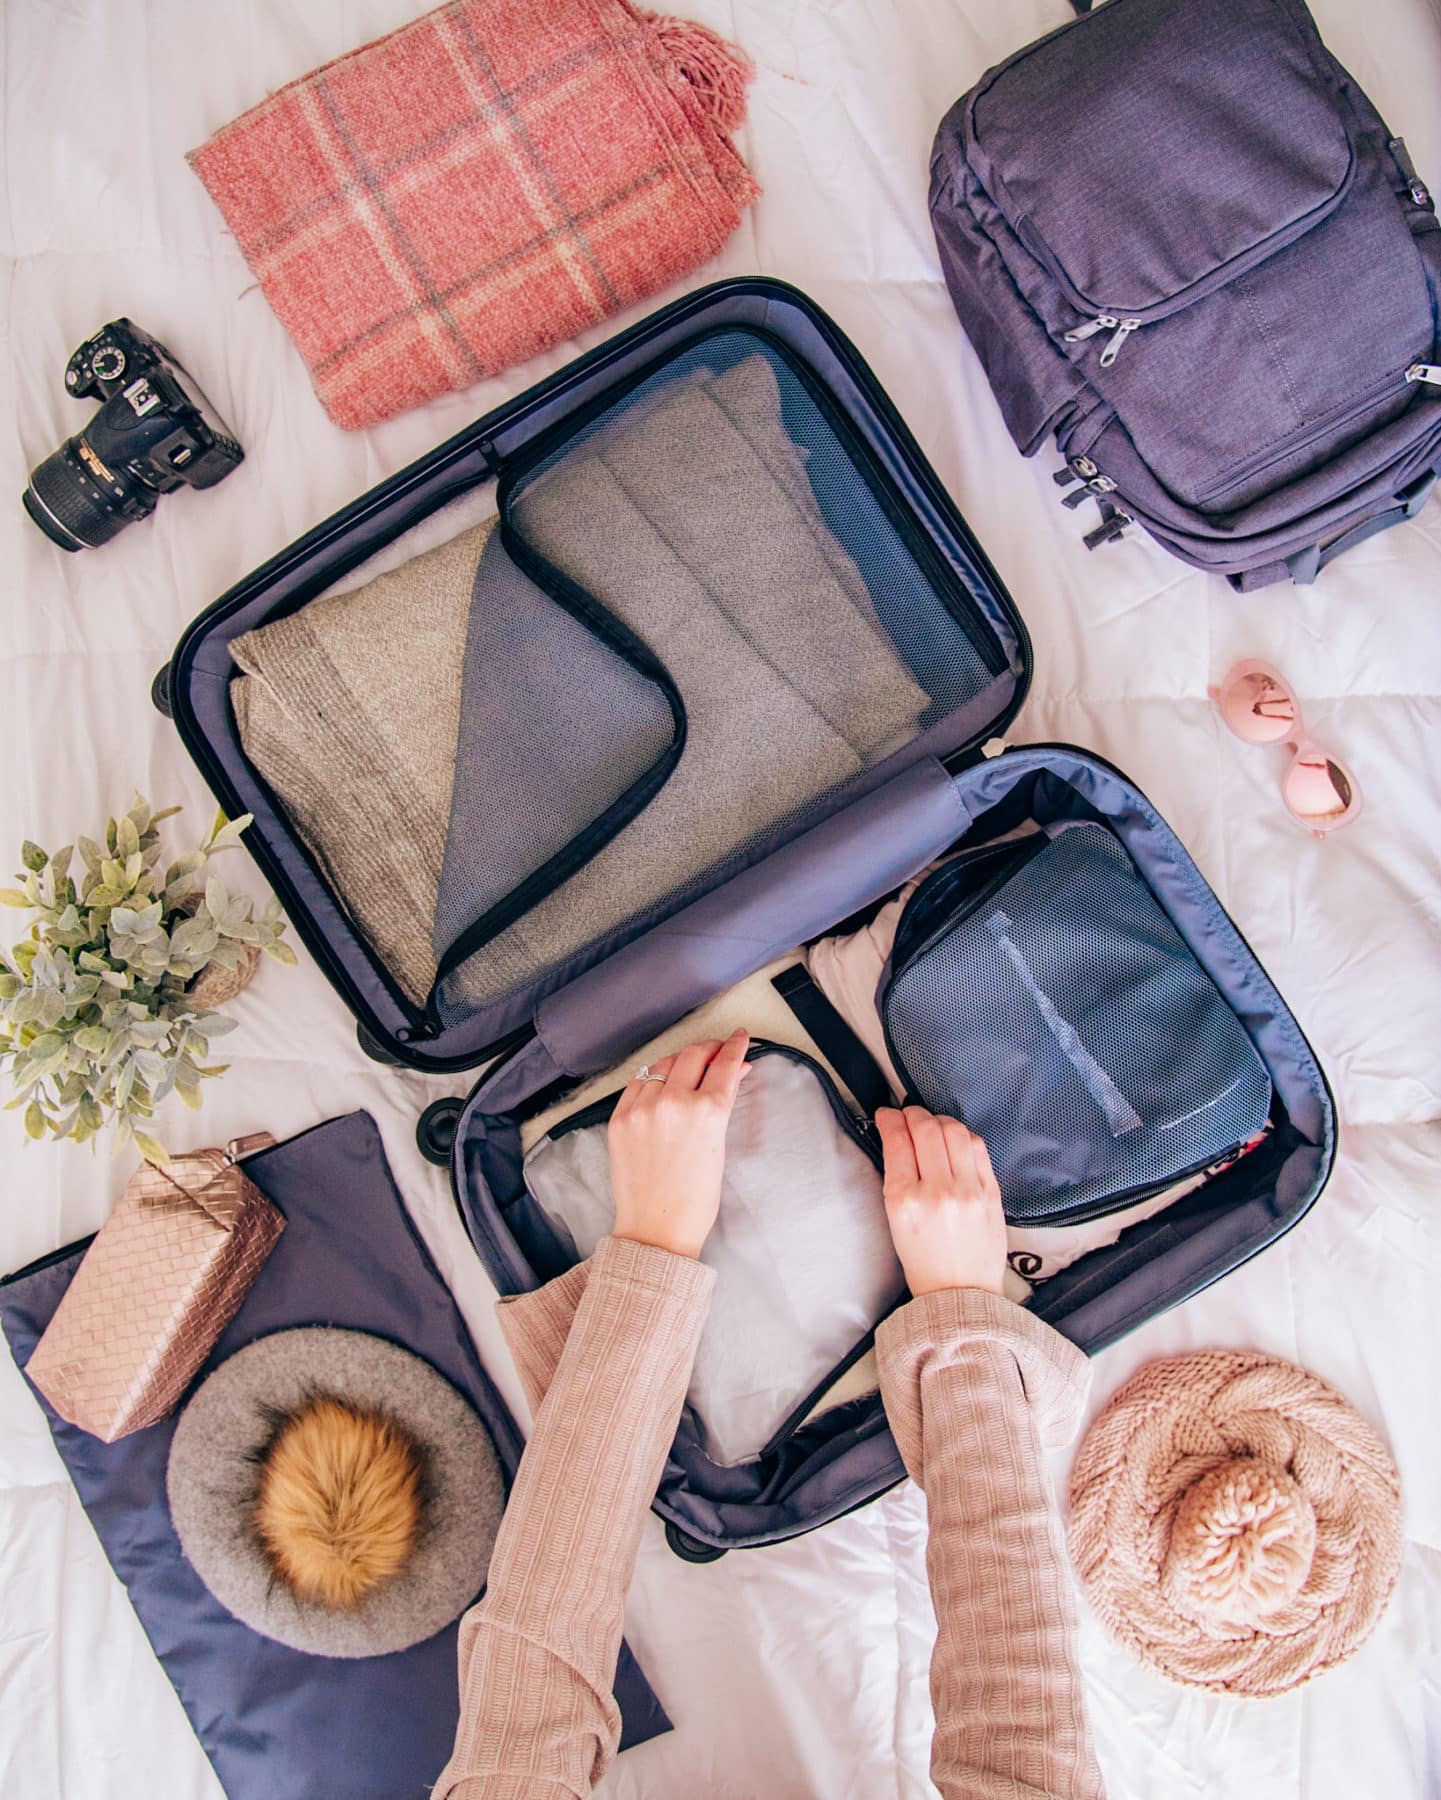 43 Travel Essentials for Women (You'll Actually Use and Love!)